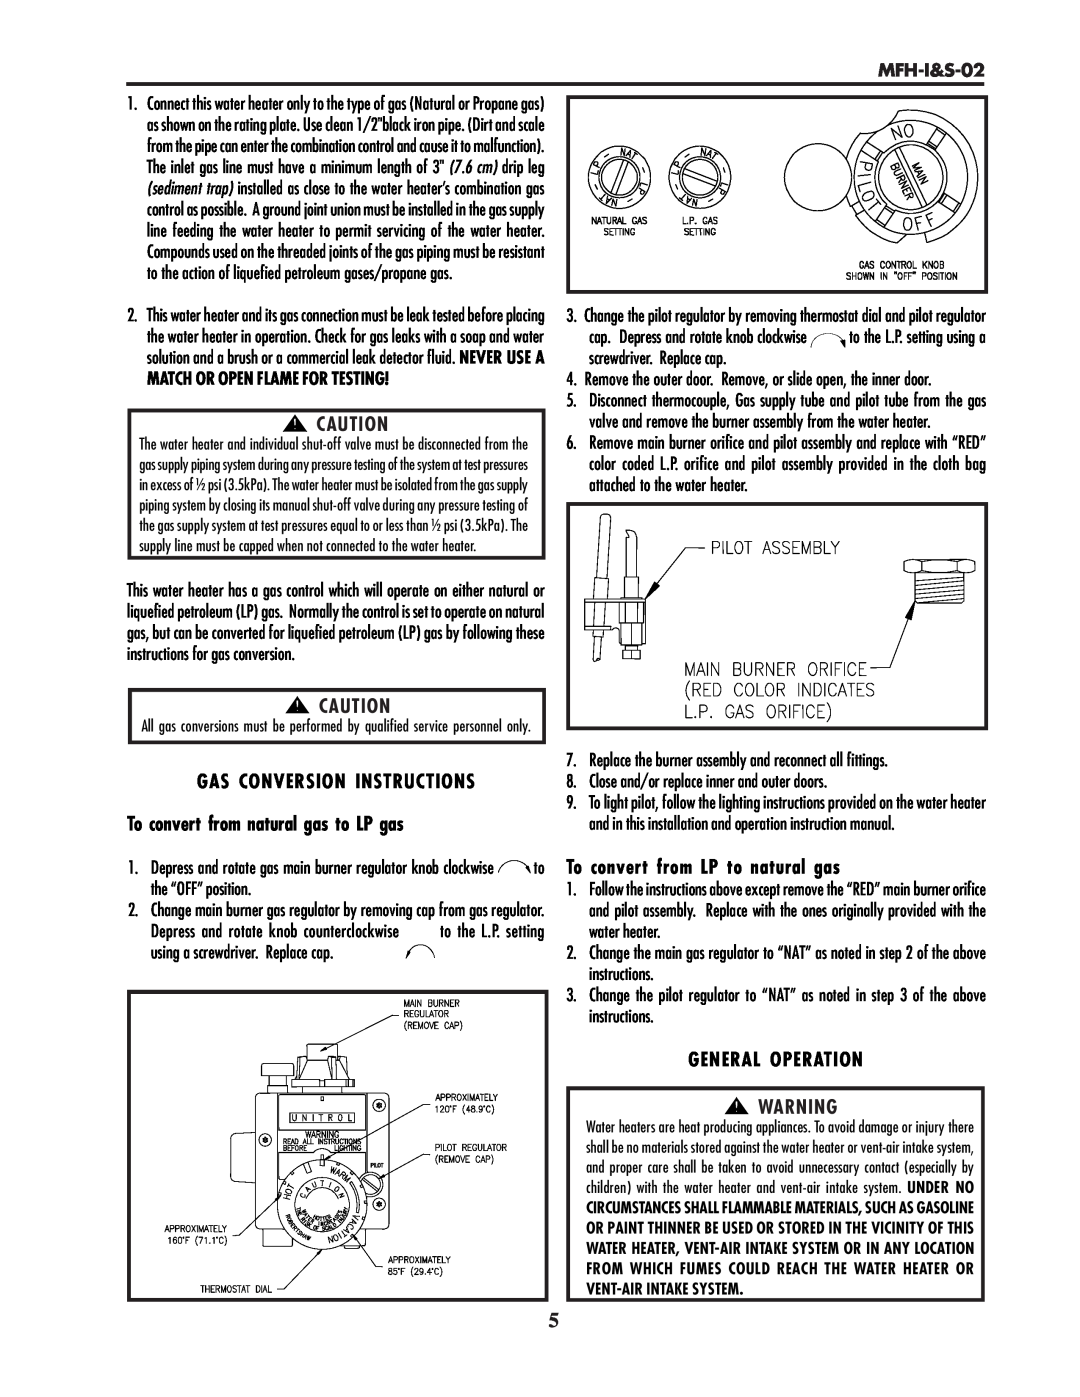 Lochinvar MFH-I&S-02 Gas Conversion Instructions, To convert from natural gas to LP gas, To convert from LP to natural gas 